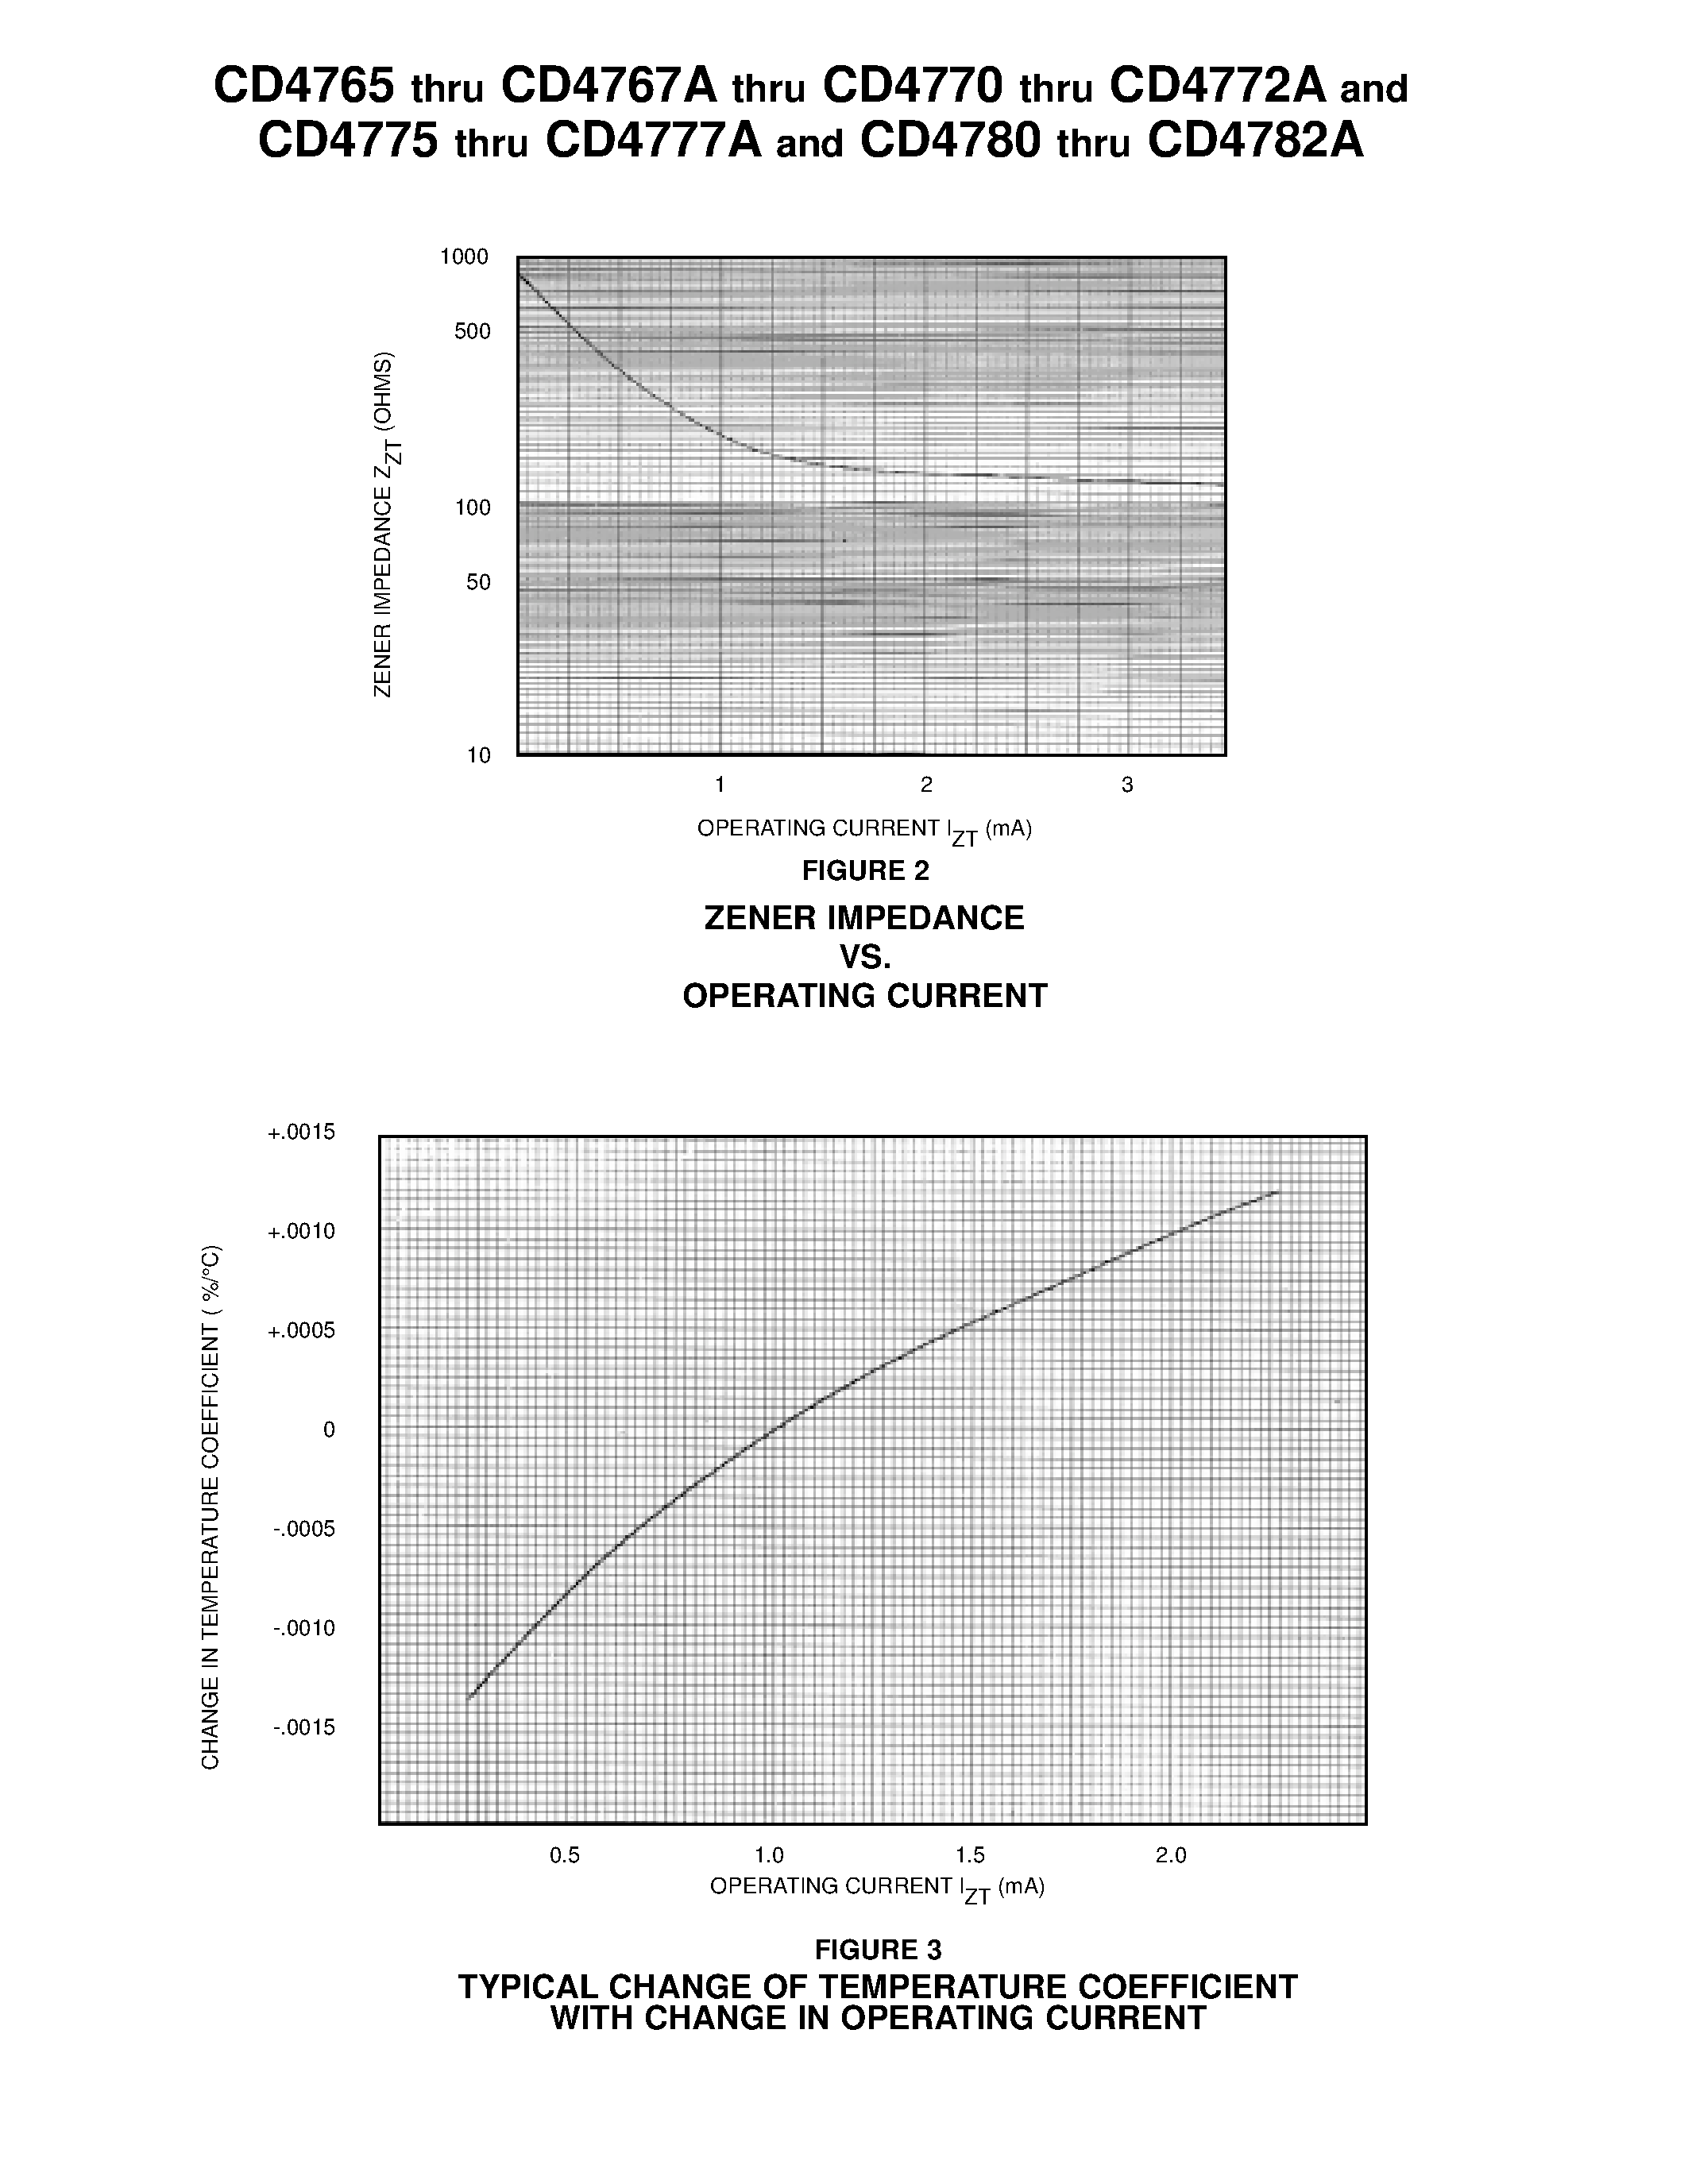 Datasheet CD4770 - MONOLITHIC TEMPERATURE COMPENSATED ZENER REFERENCE CHIPS page 2